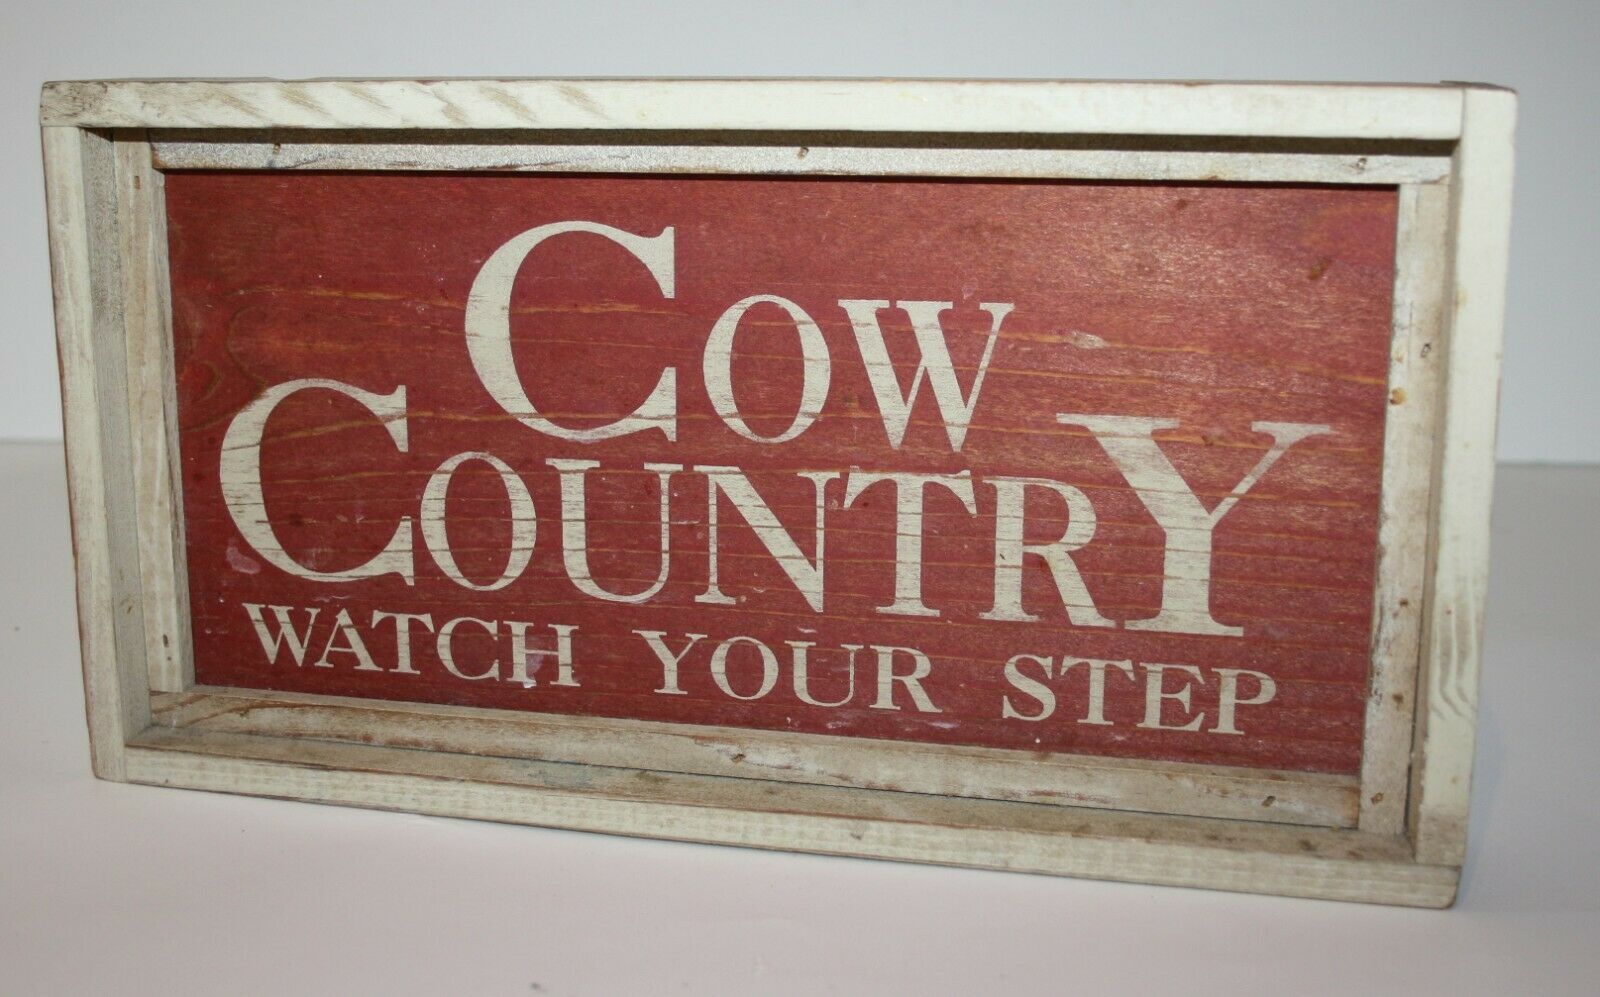 Cow Country Watch Your Step Wood Wall Plaque Sign Picture 11.25" X 6" Farmhouse